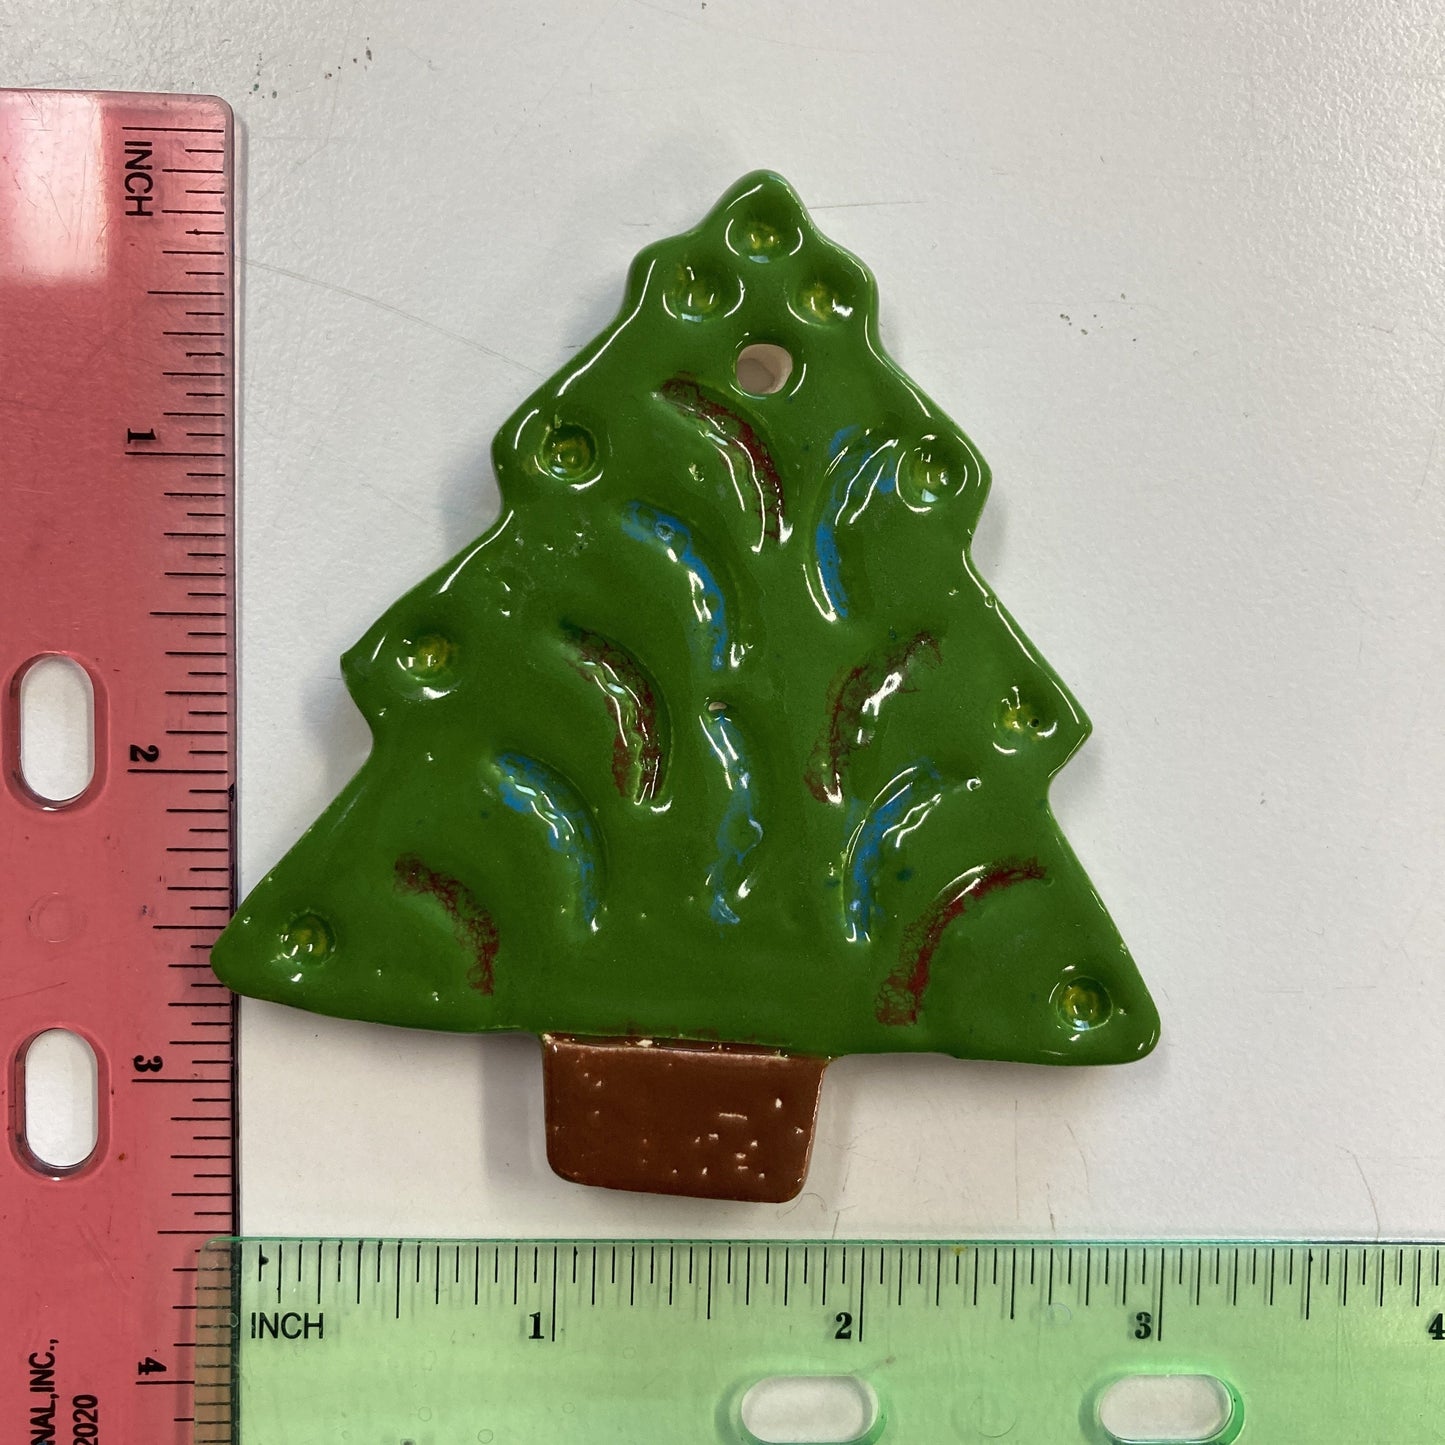 WATCH Resources Art Guild - Ceramic Arts Handmade Clay Crafts Glazed 3.5-inch x 3-inch Christmas Tree Ornament by Alec Lopez and Janice Stephens